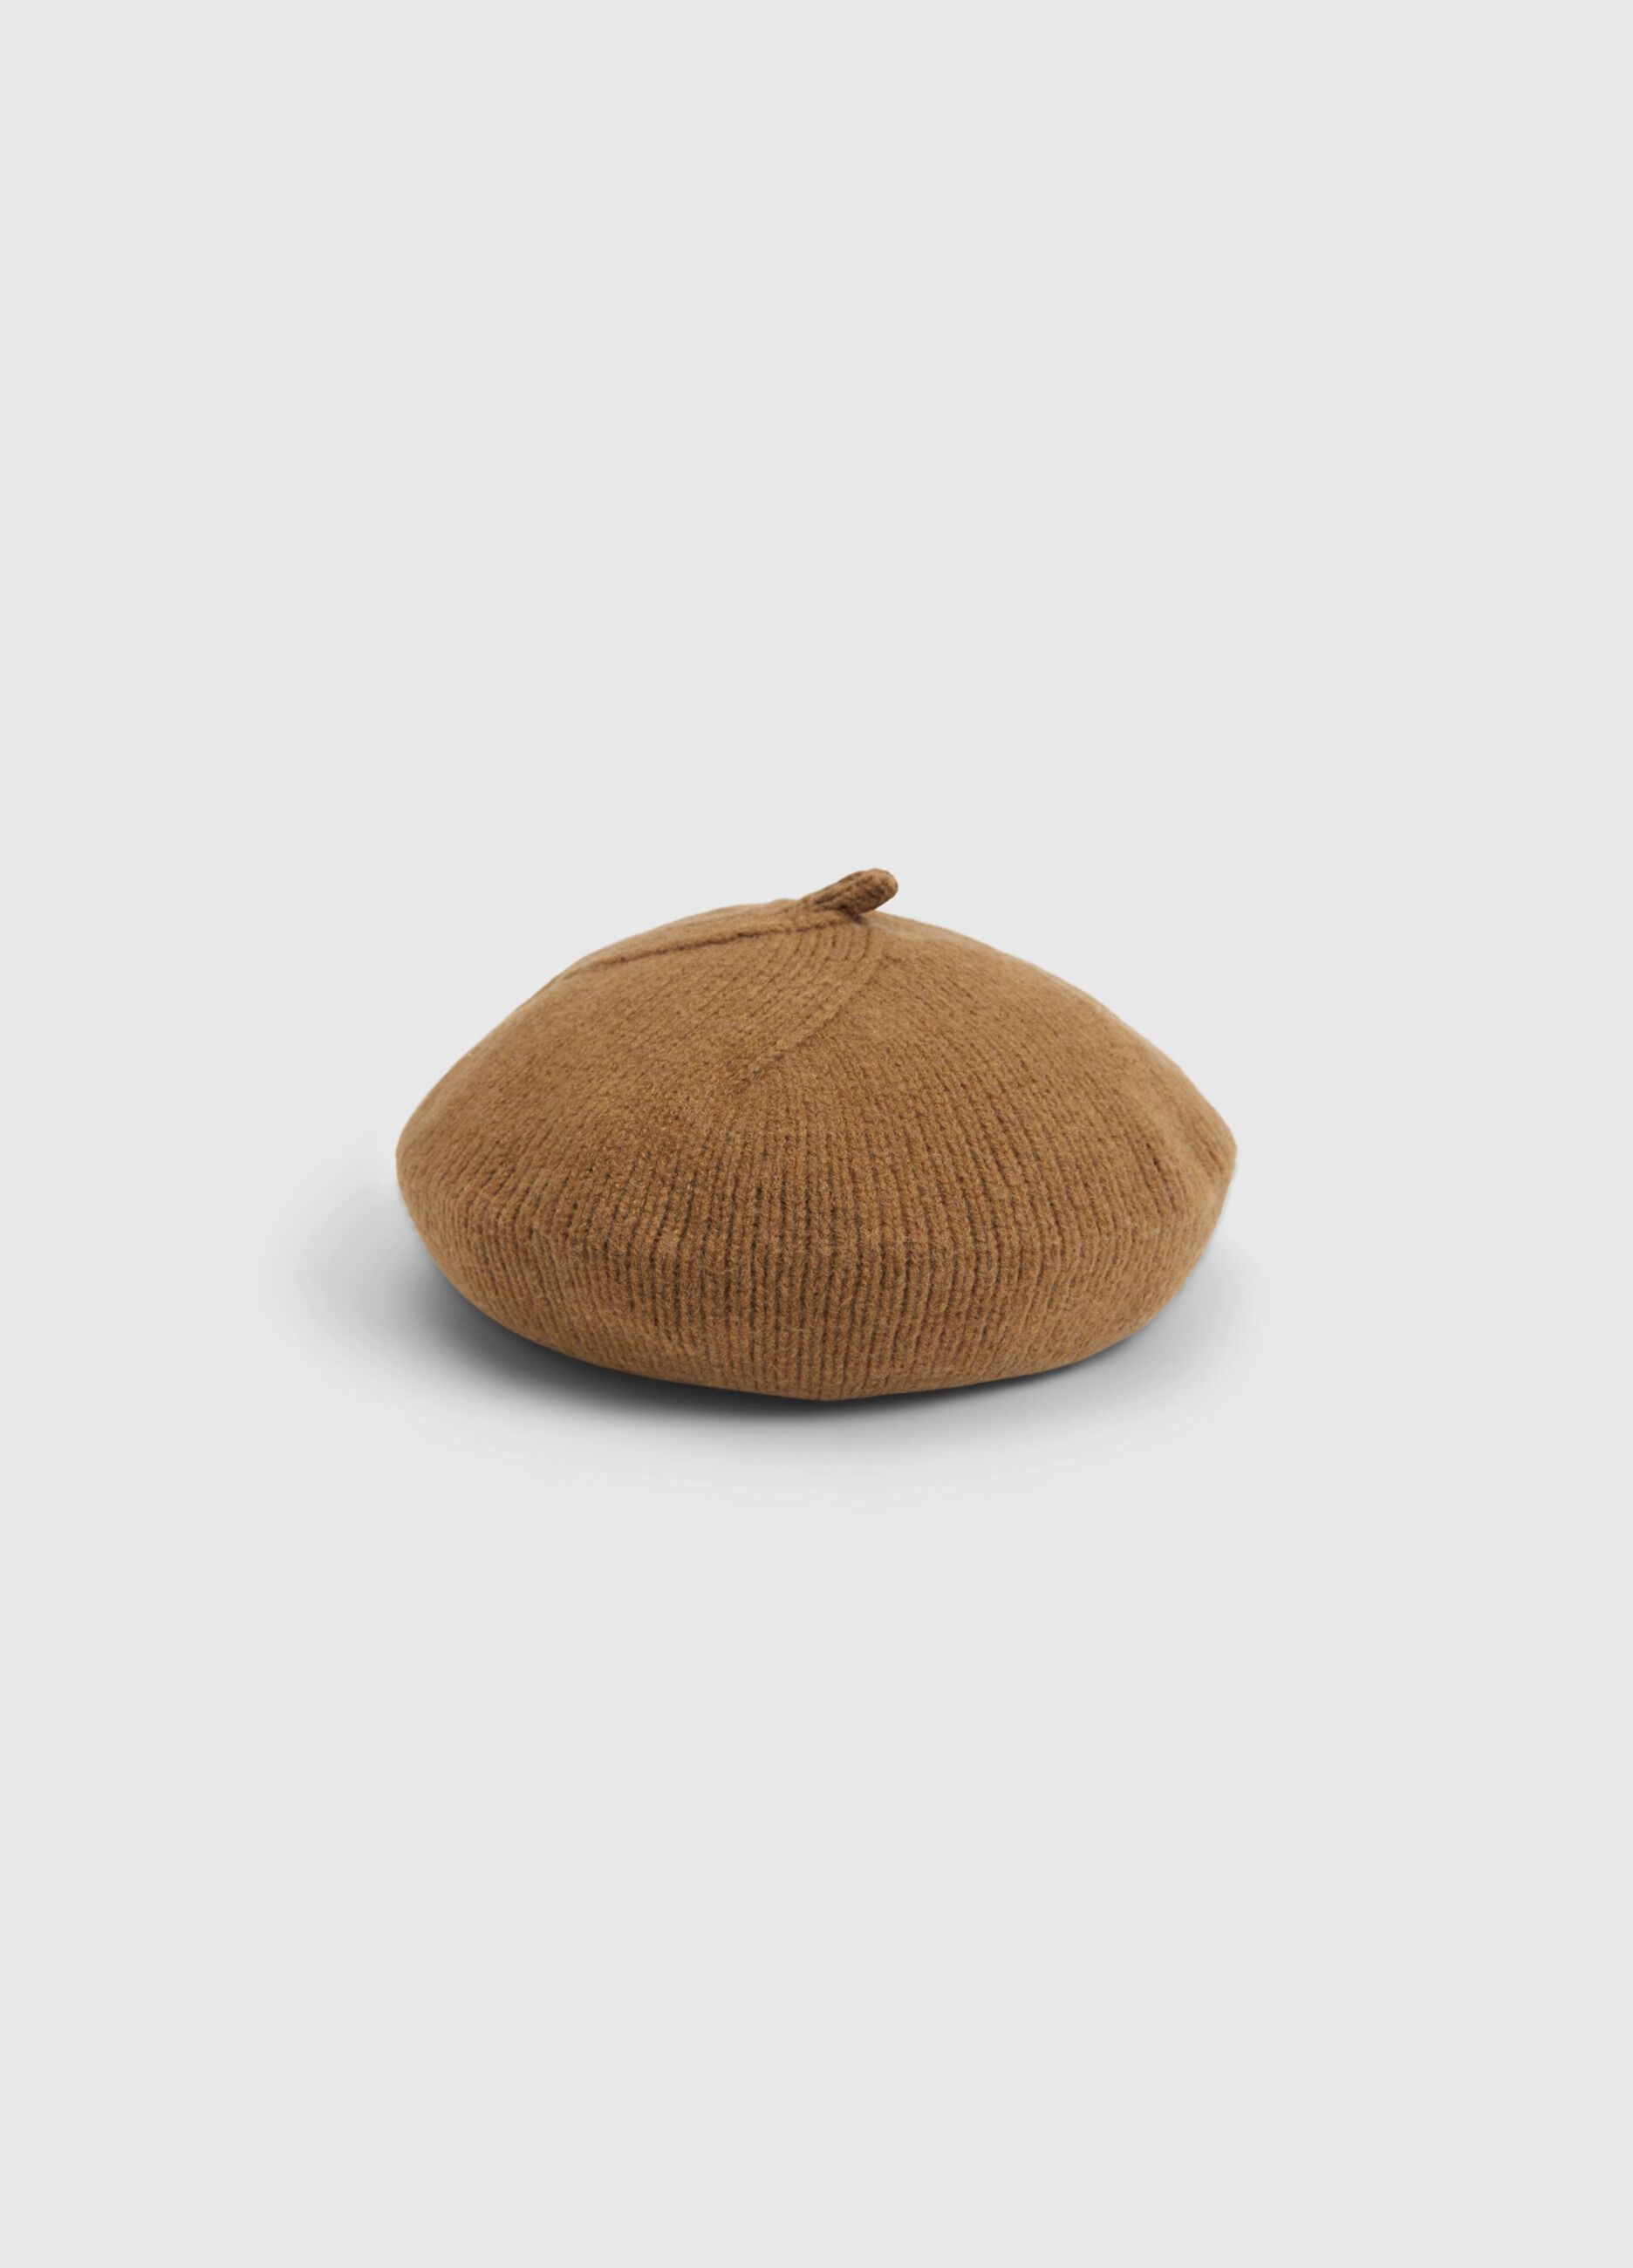 Knitted French beret